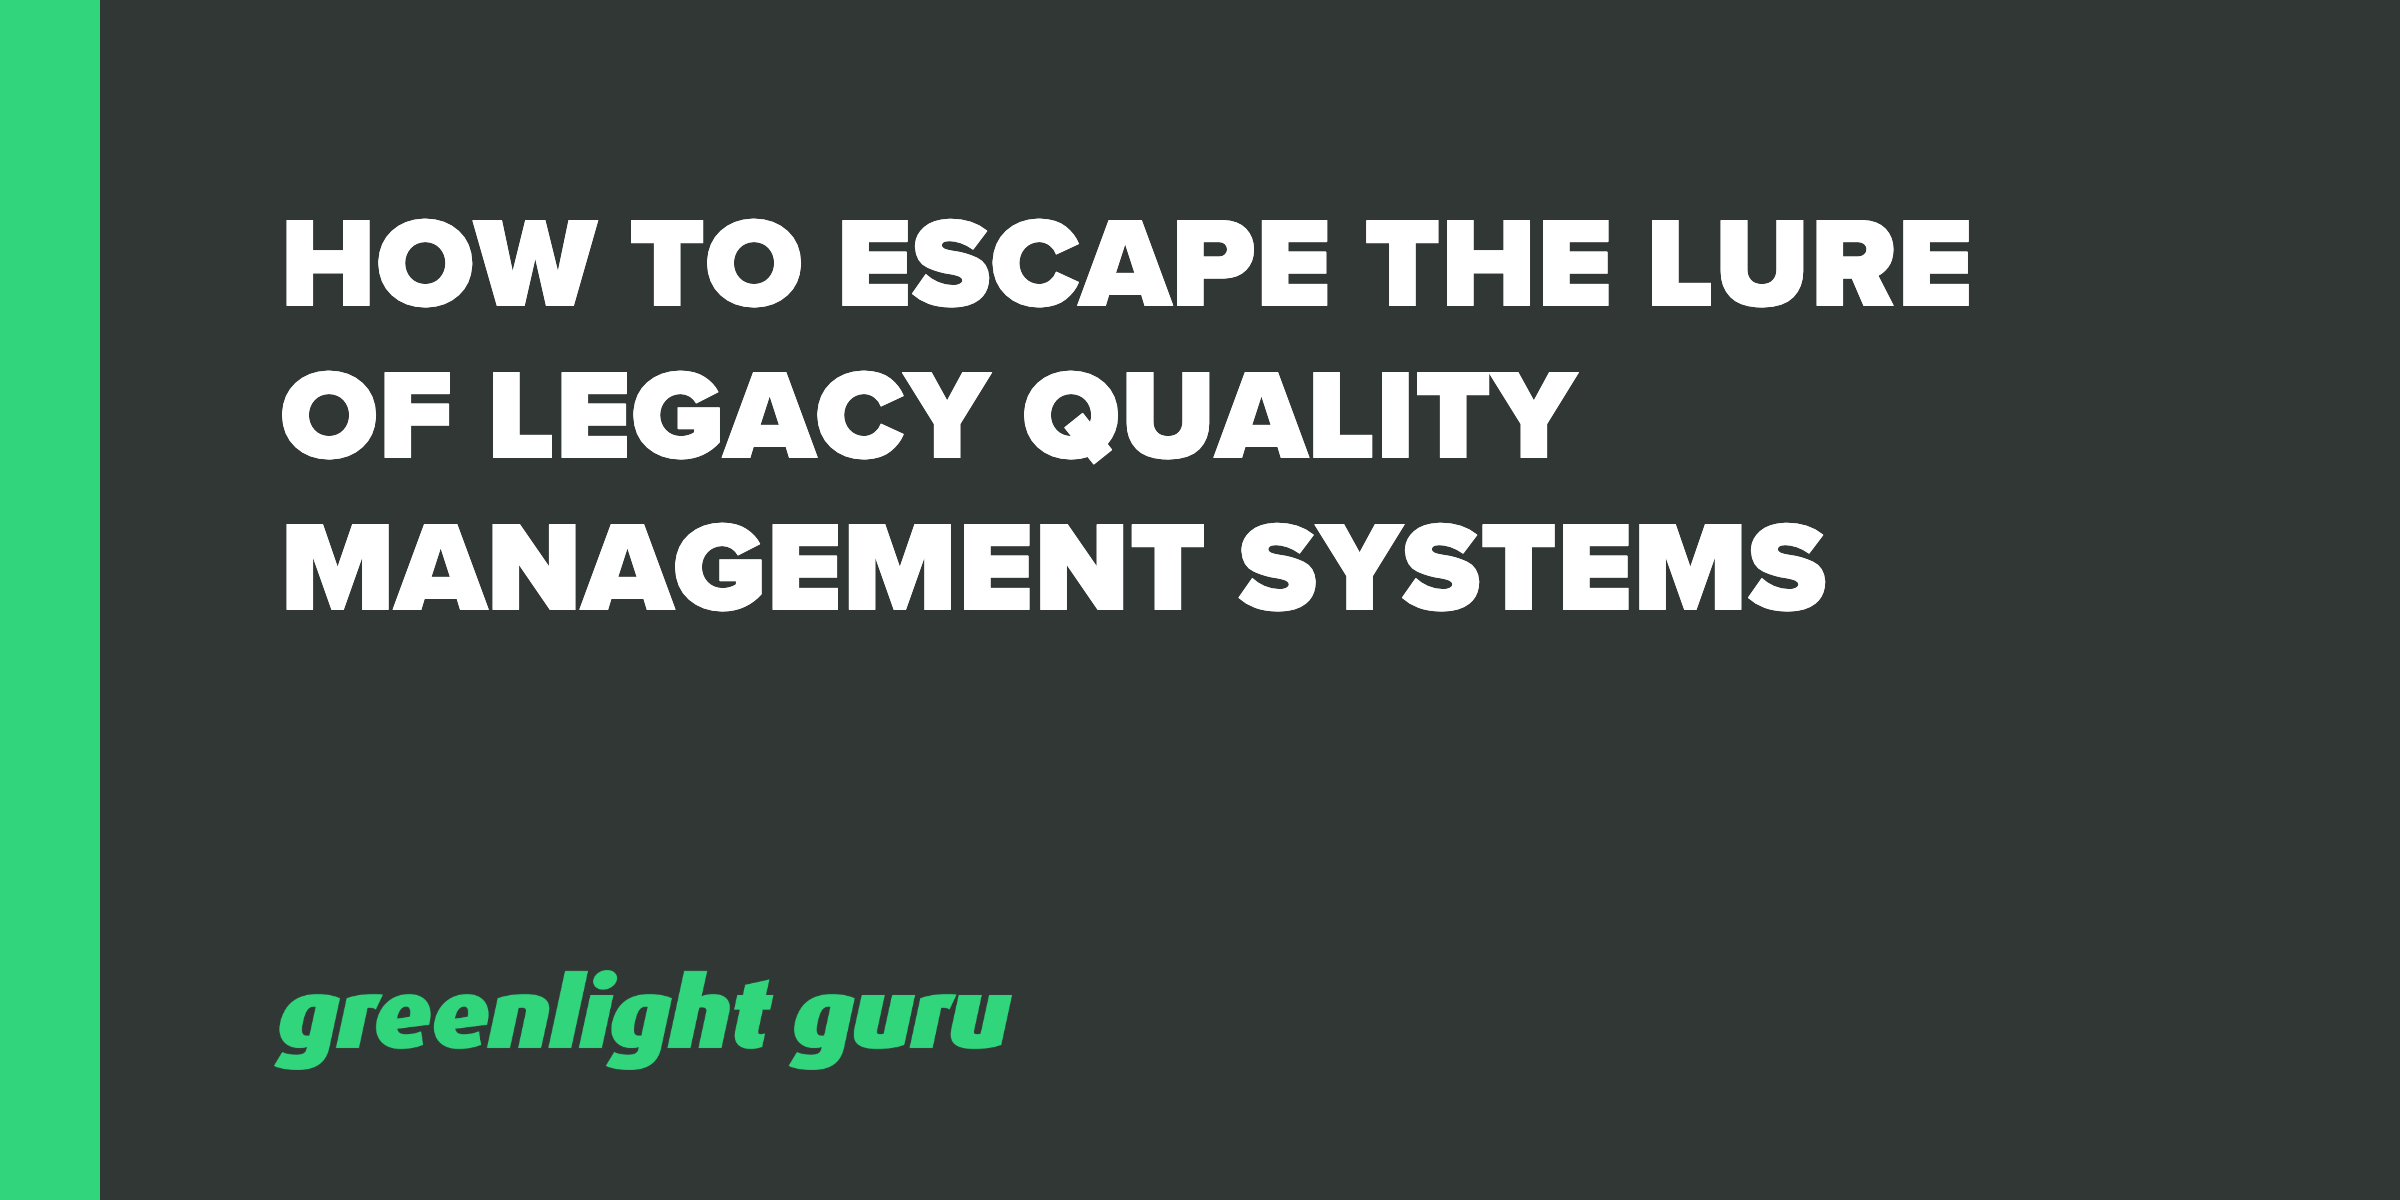 How to Escape the Lure of Legacy Quality Management Systems